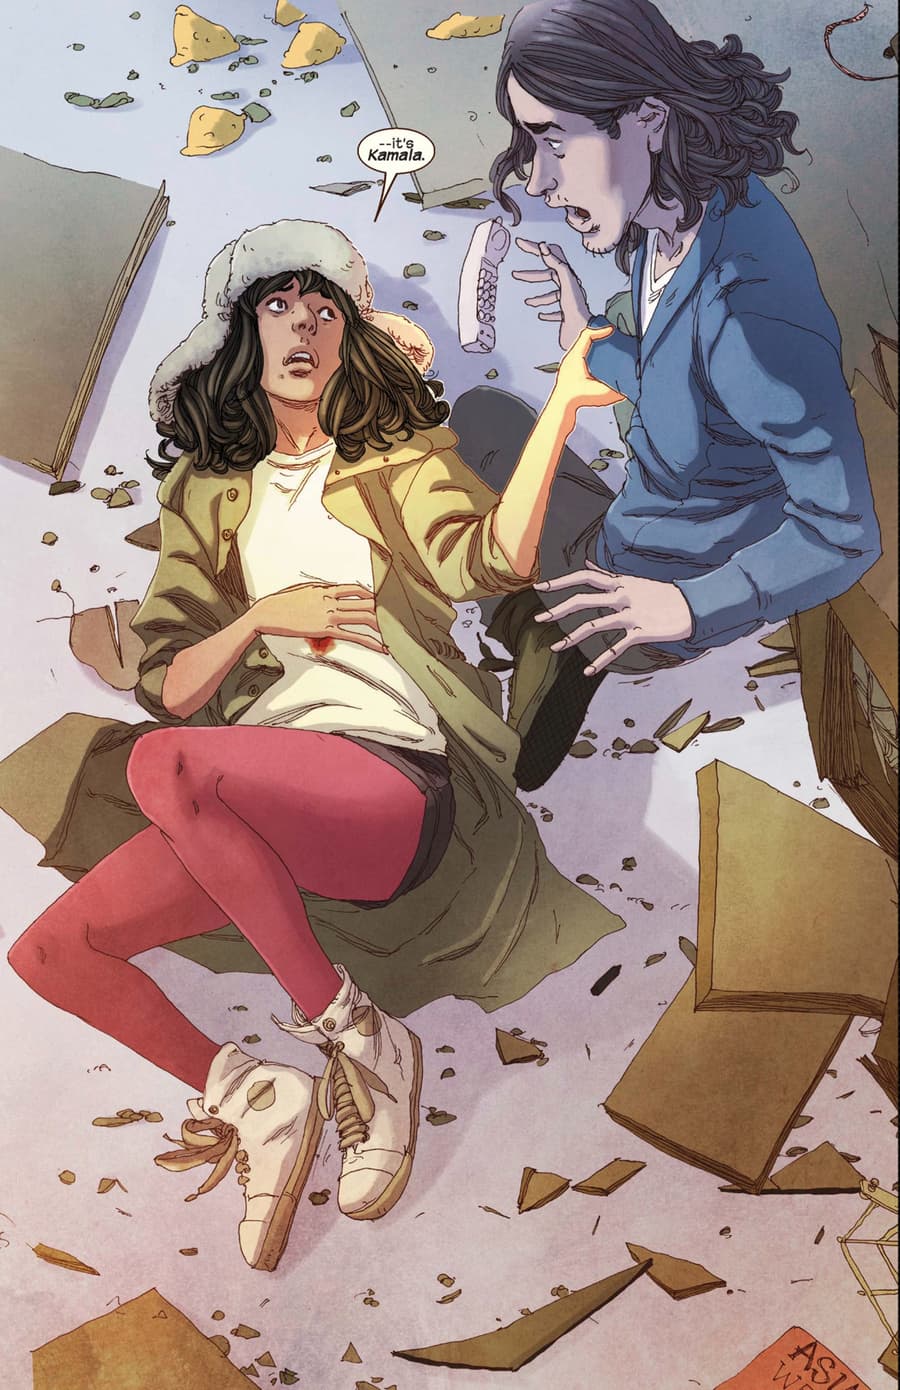 MS. MARVEL (2014) #4 page by G. Willow Wilson and Adrian Alphona